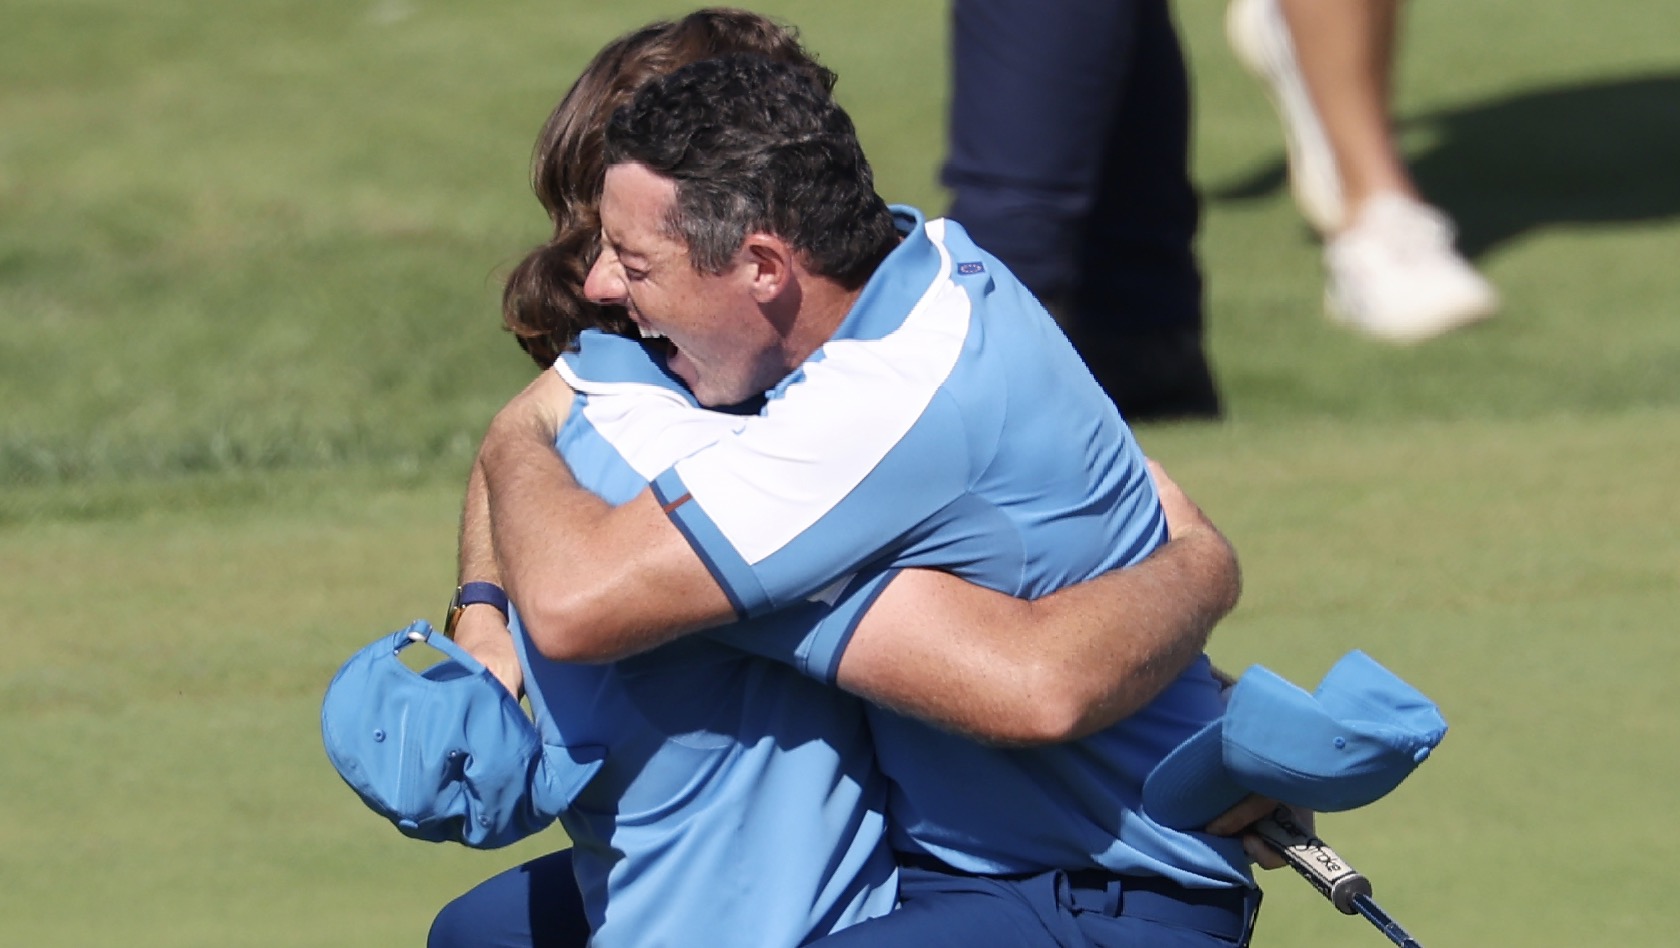 Europe sweep first session of Ryder Cup